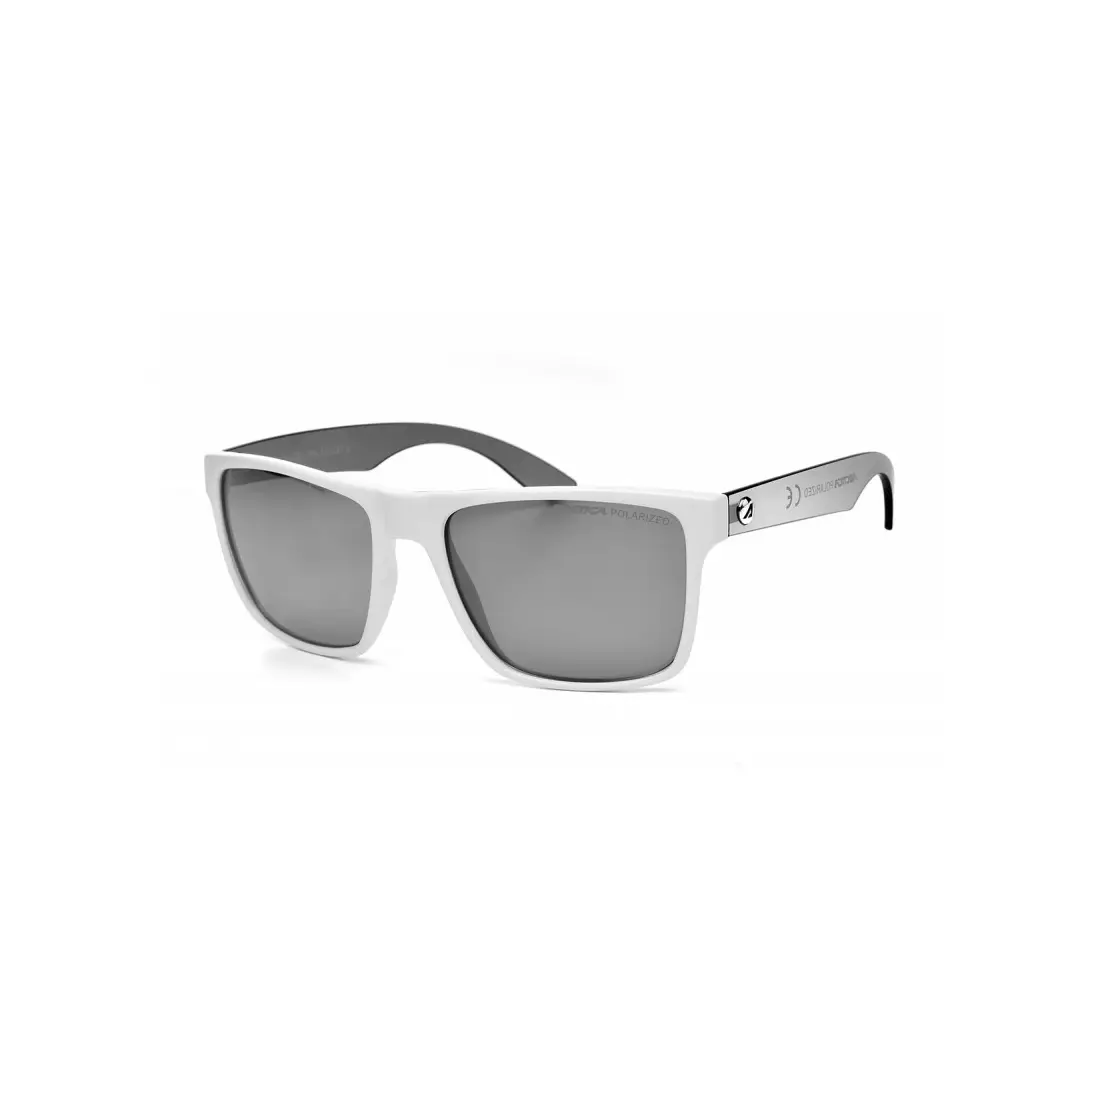 ARCTICA cycling / sports glasses, S 279A